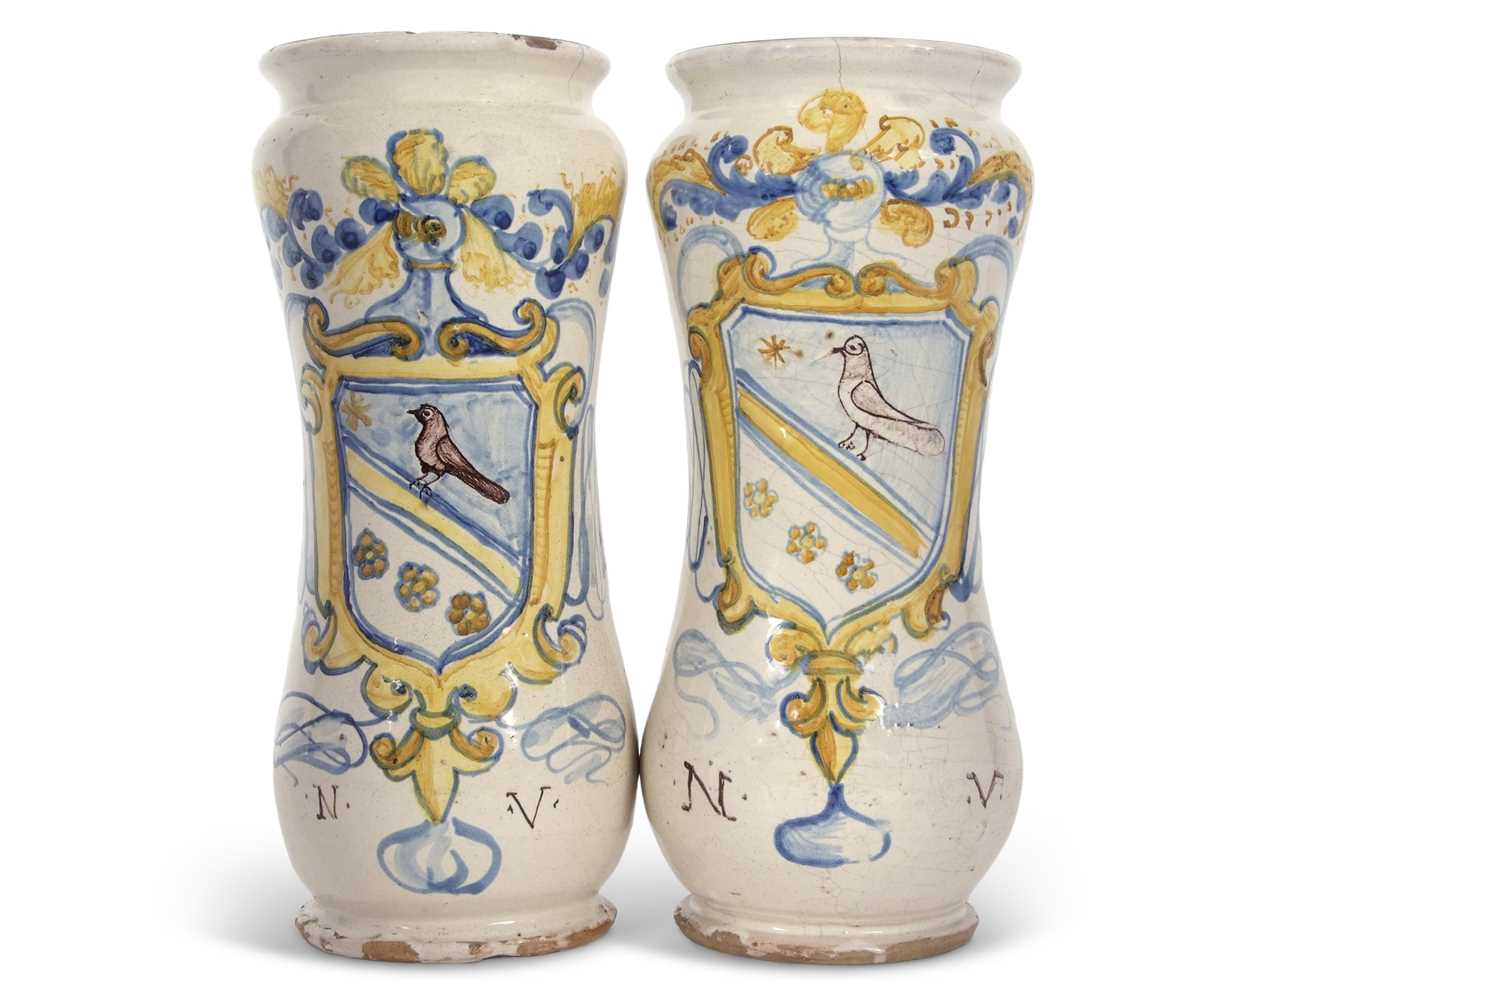 A further large pair of Italian Alberelli also decorated in polychrome with an armorial with the